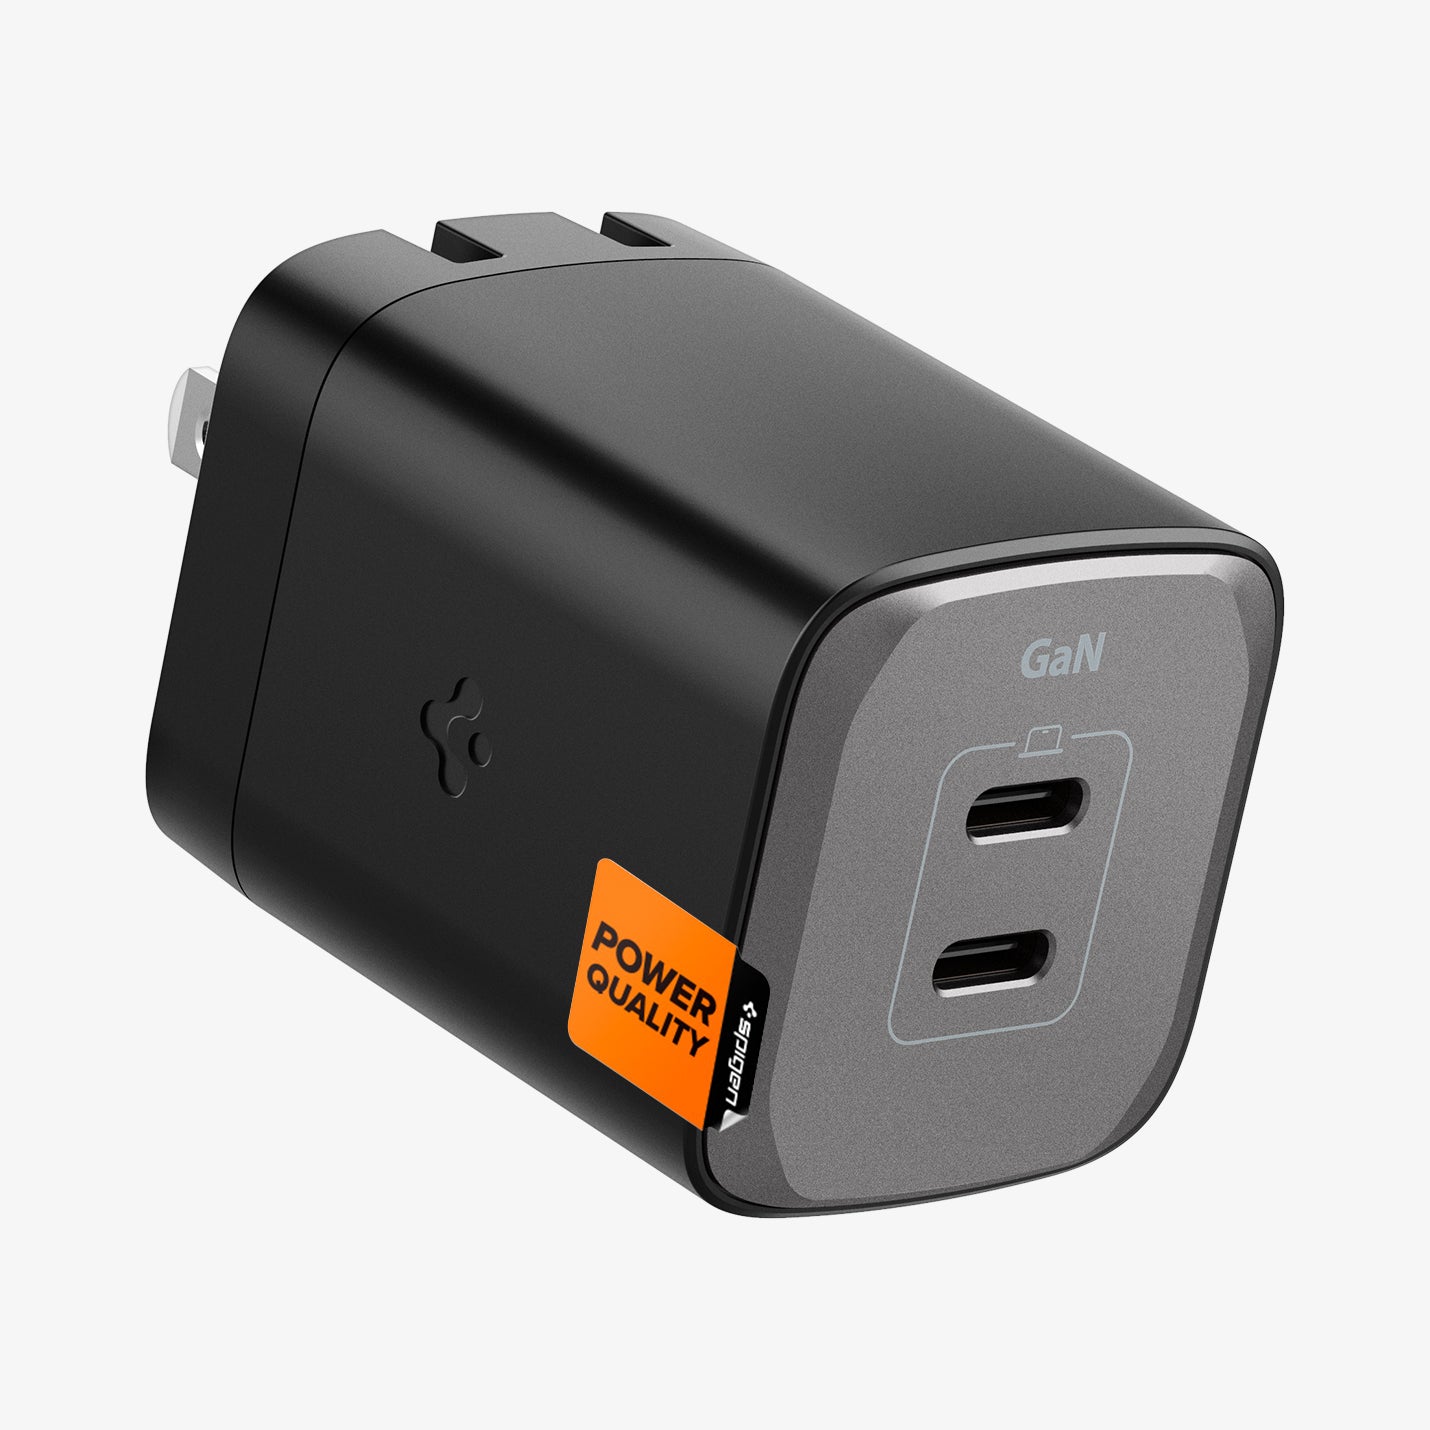 ACH05160 - ArcStation™ Pro GaN 652 Dual USB-C Wall Charger PE2204 in Midnight Black showing the top and partial sides of the wall charger